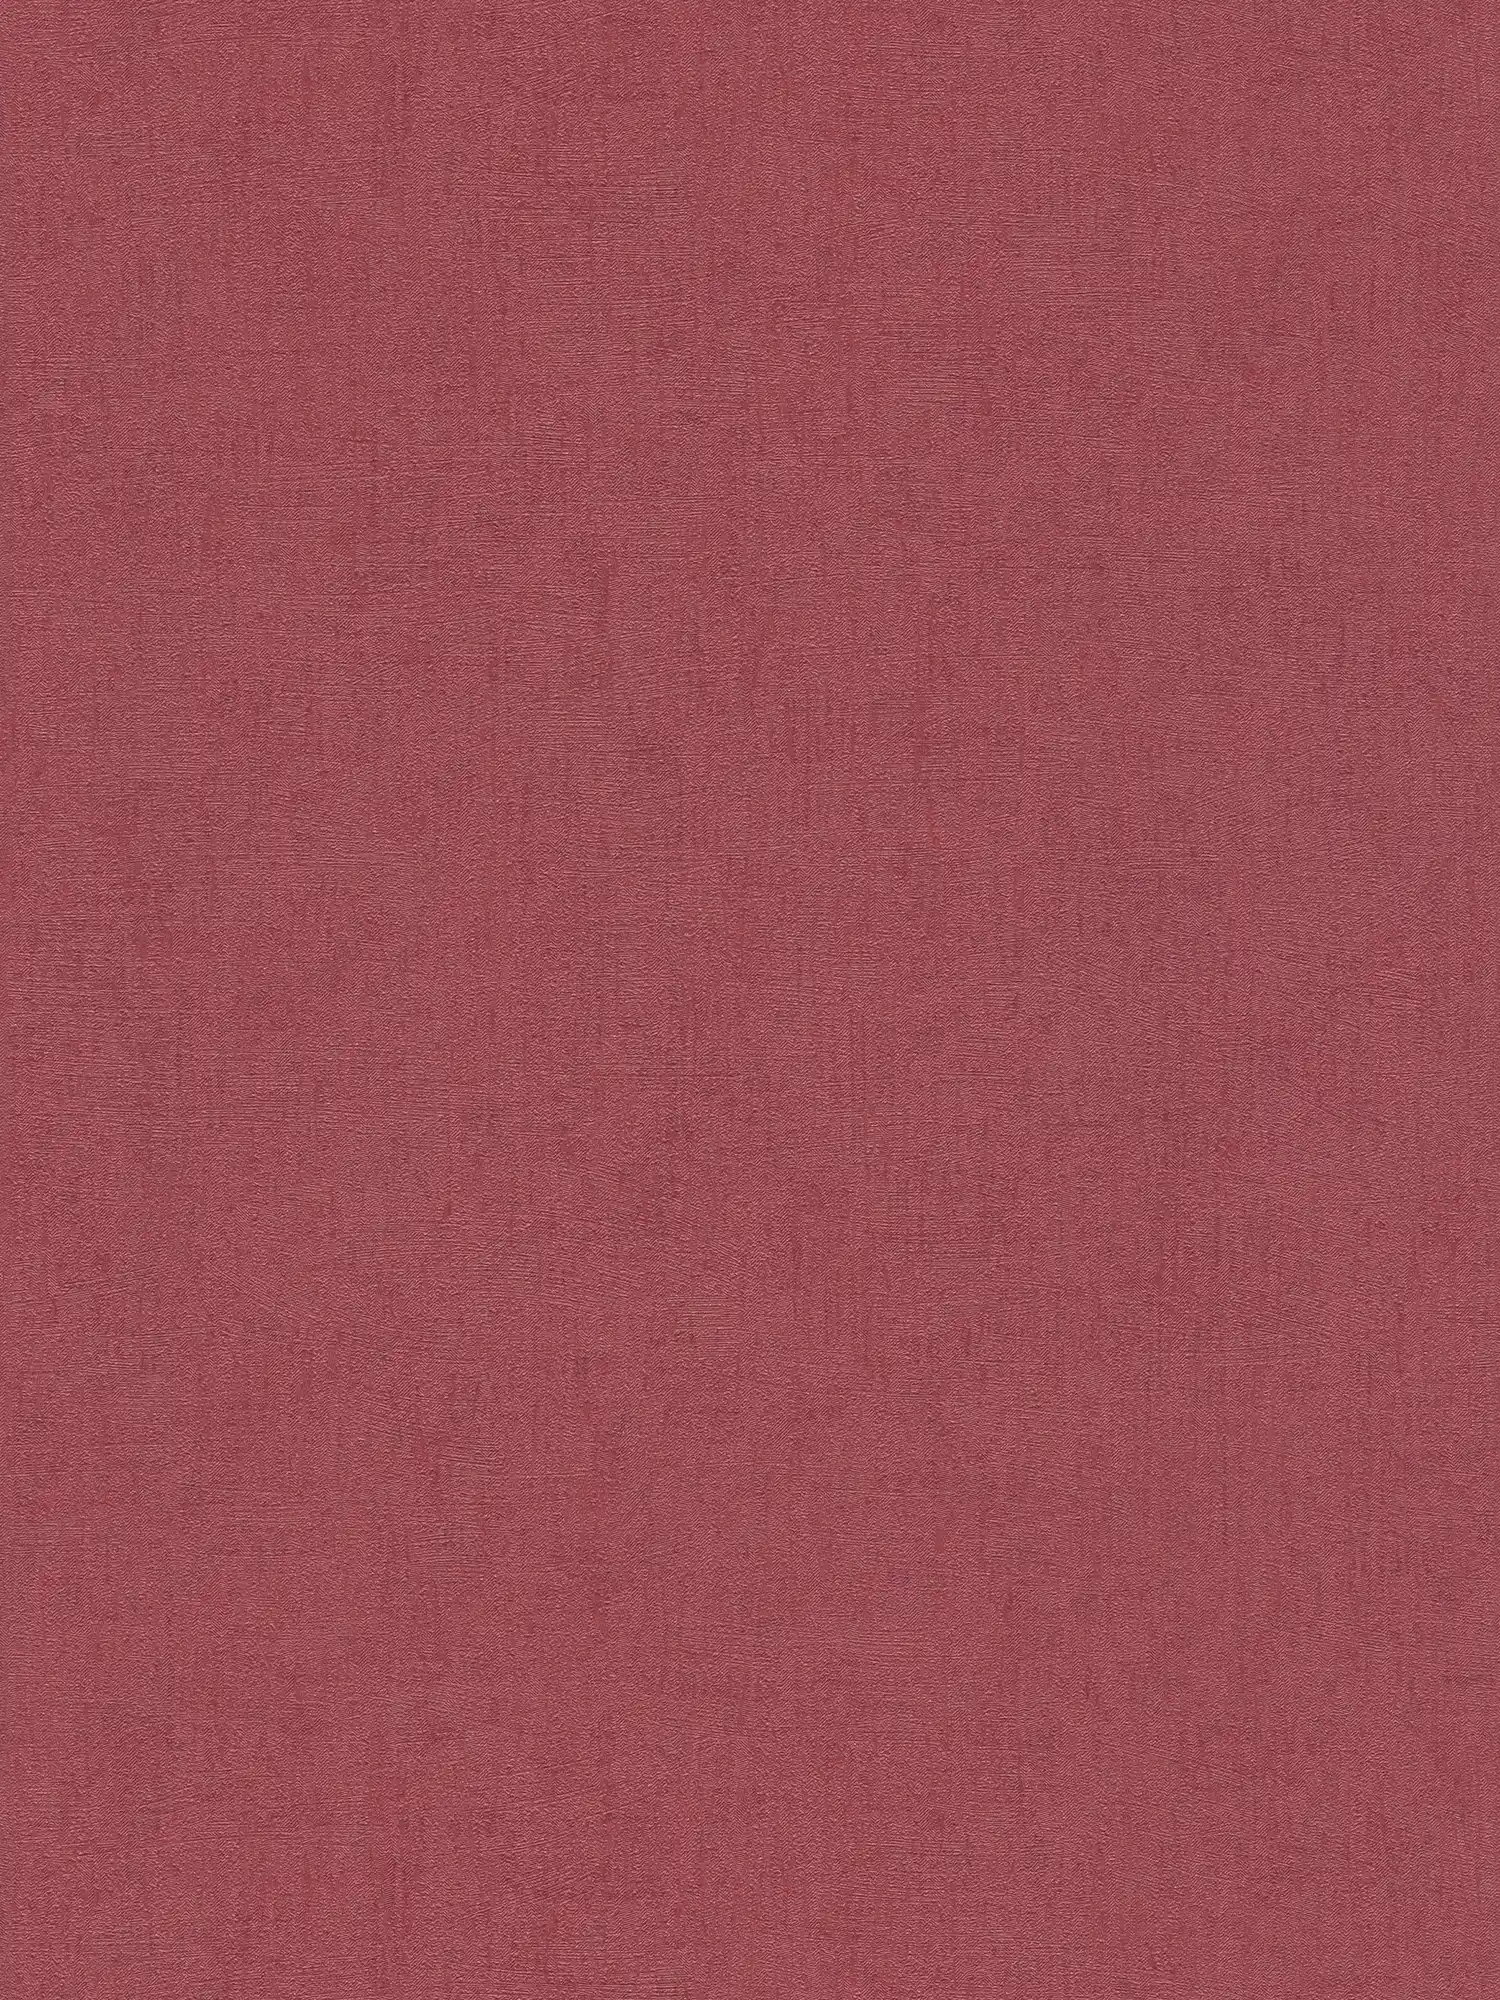 Wallpaper dark red, glossy with texture embossing - metallic, red
